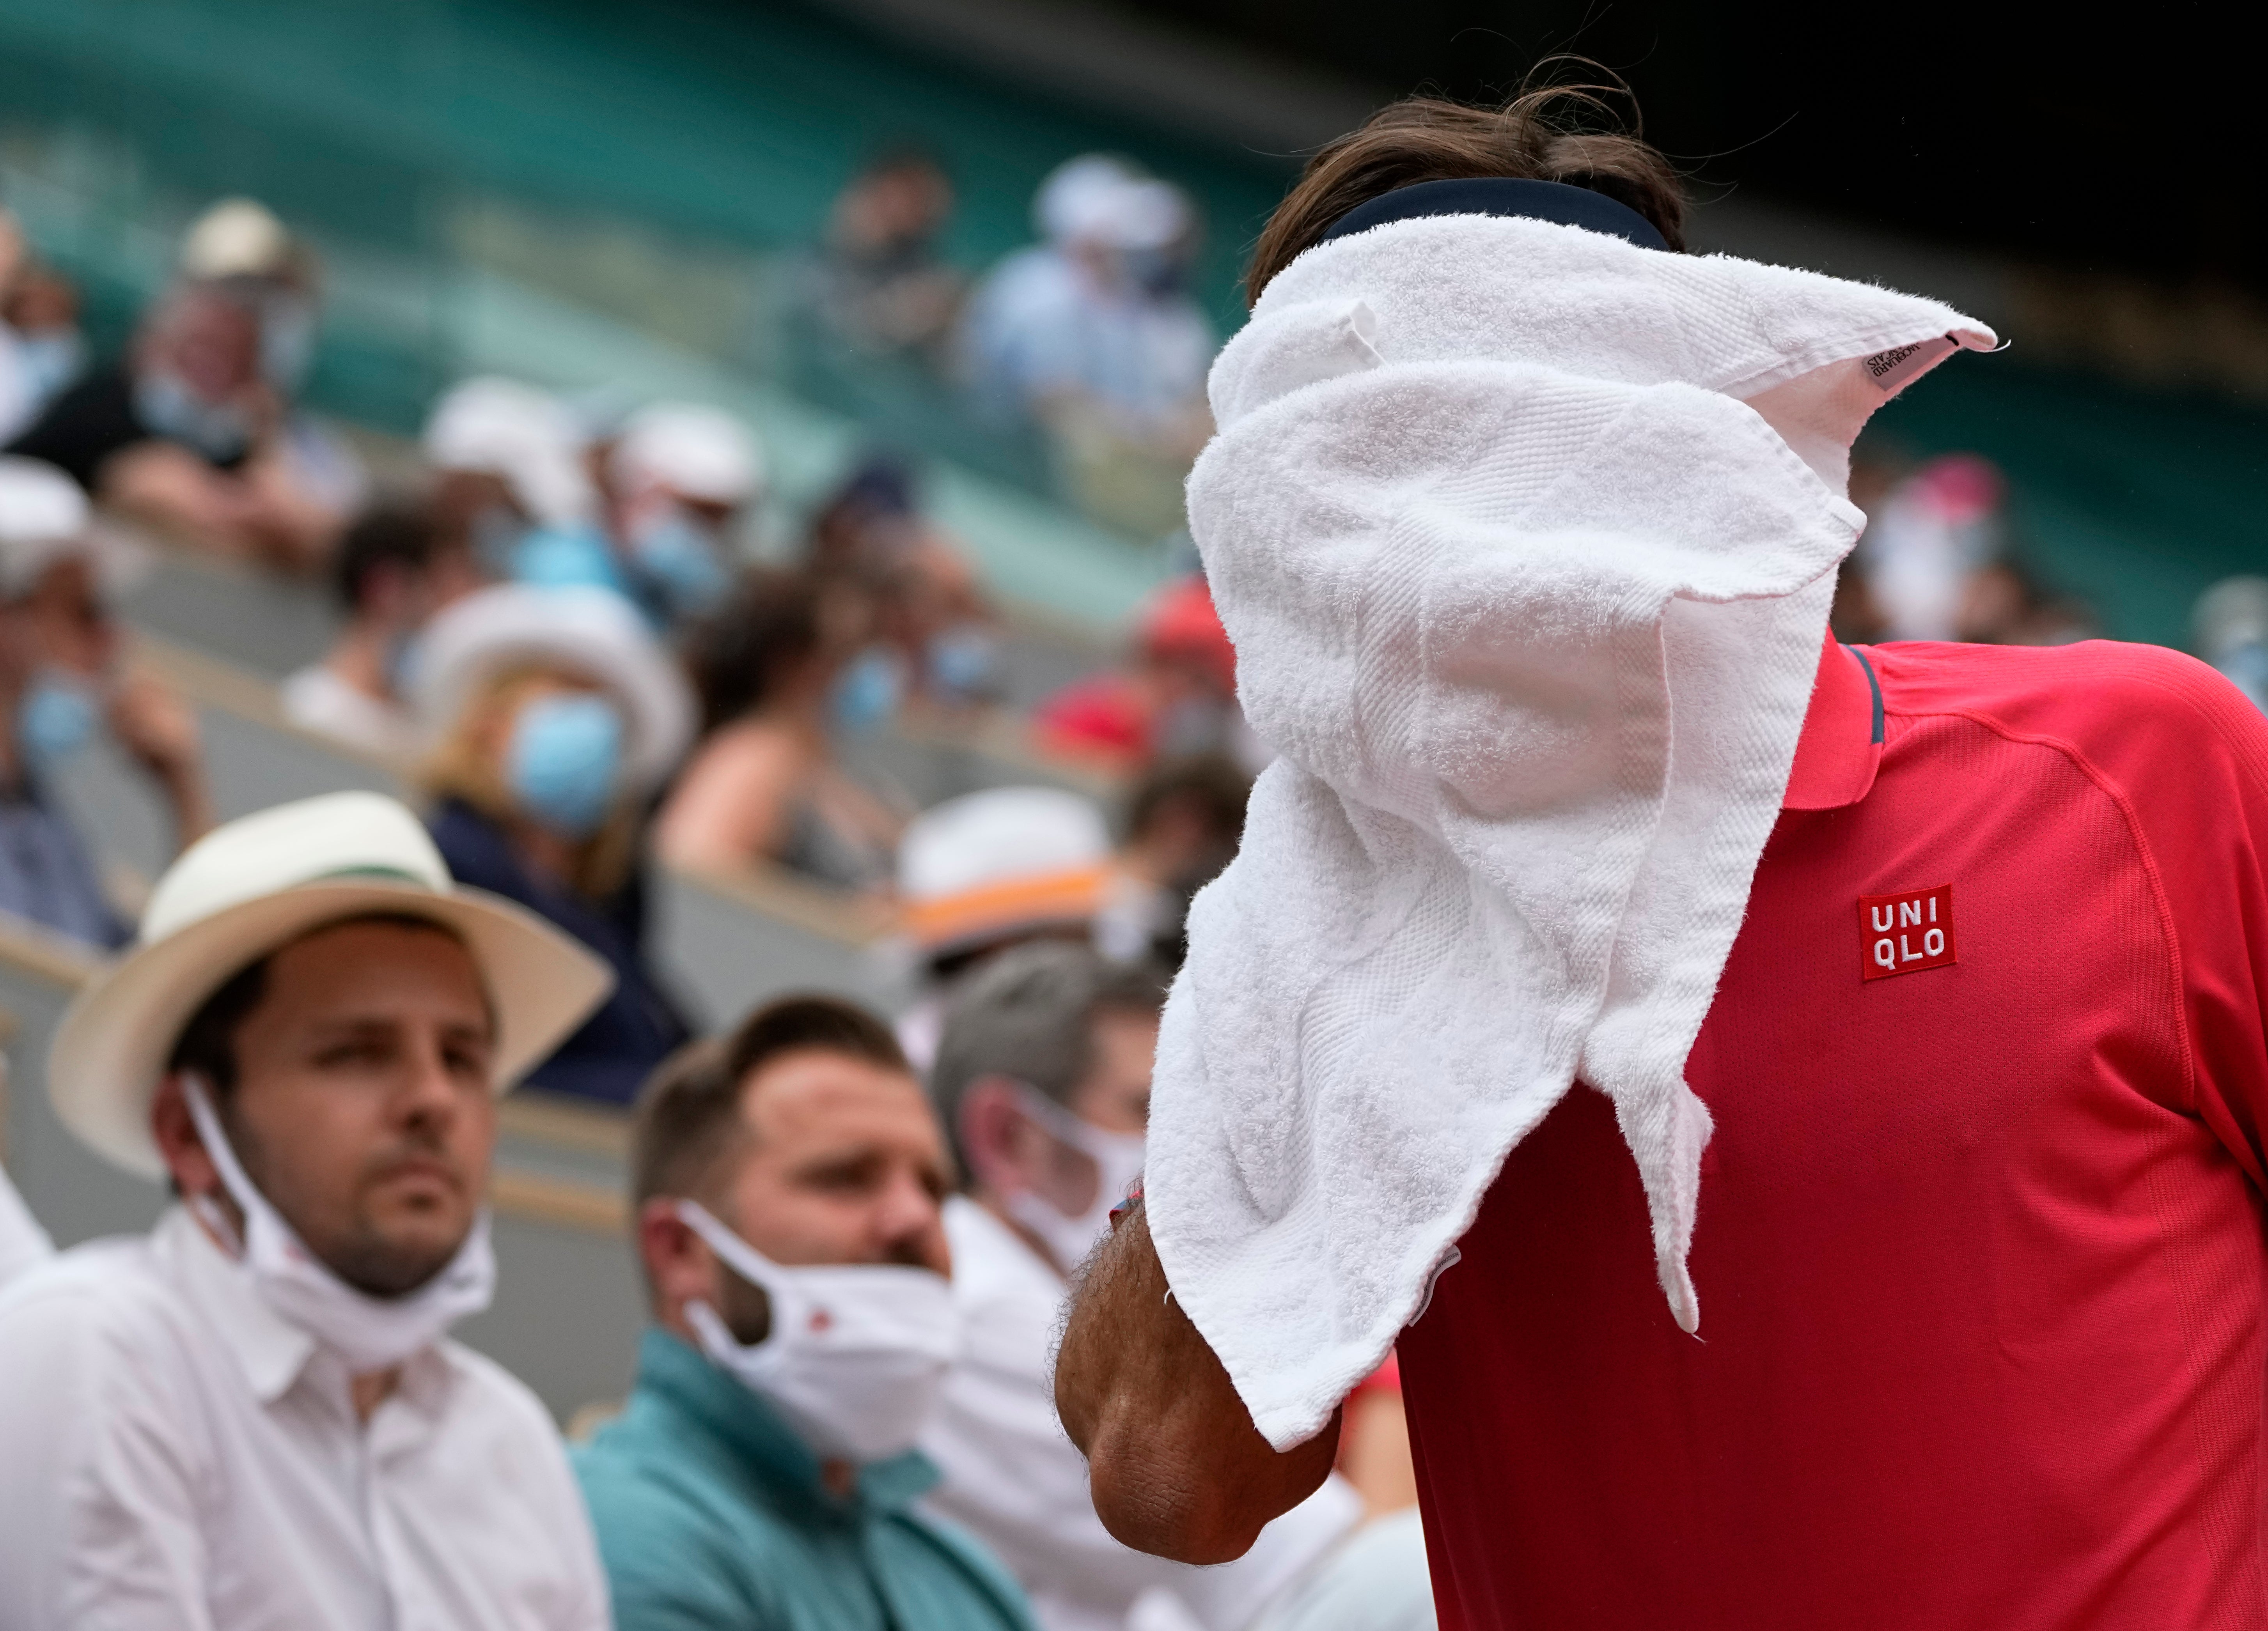 Roger Federer got into trouble over his use of a towel between points